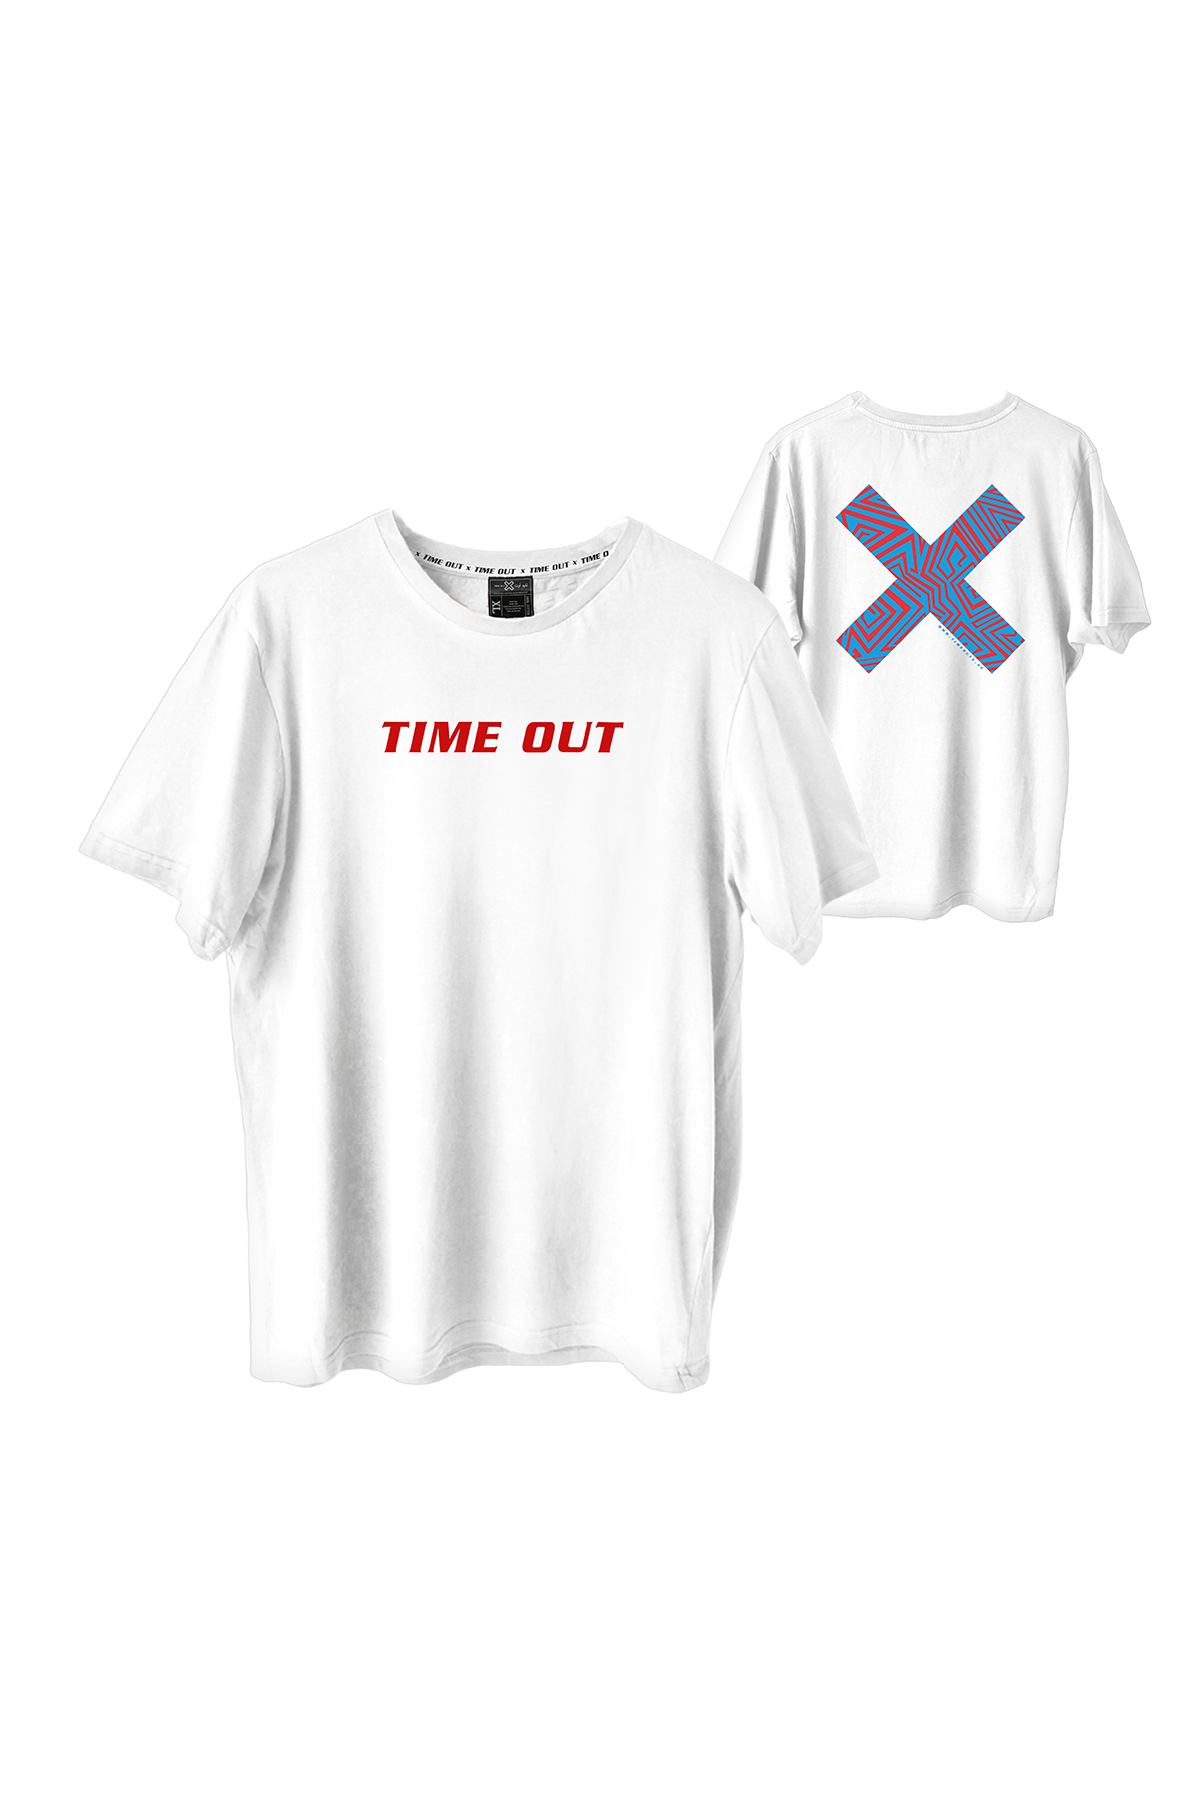 Time-Out-X-Signature-X-Triangle-Maze-Pattern-T-Shirt—Front-and-Back